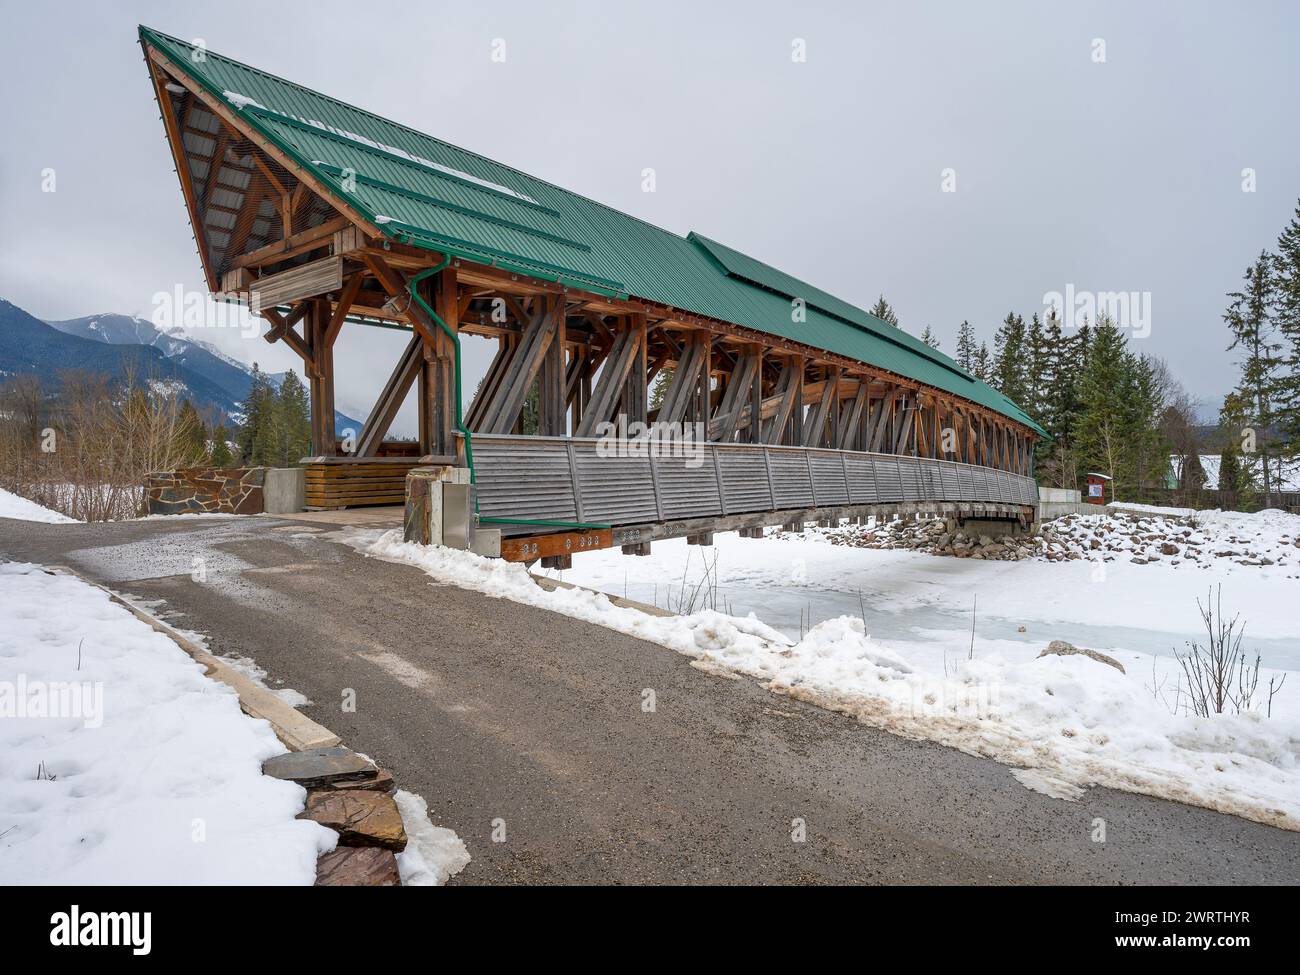 Pedestrian pathway and covered bridge over the Kicking Horse River in the town of Golden, British Columbia, Canada Stock Photo